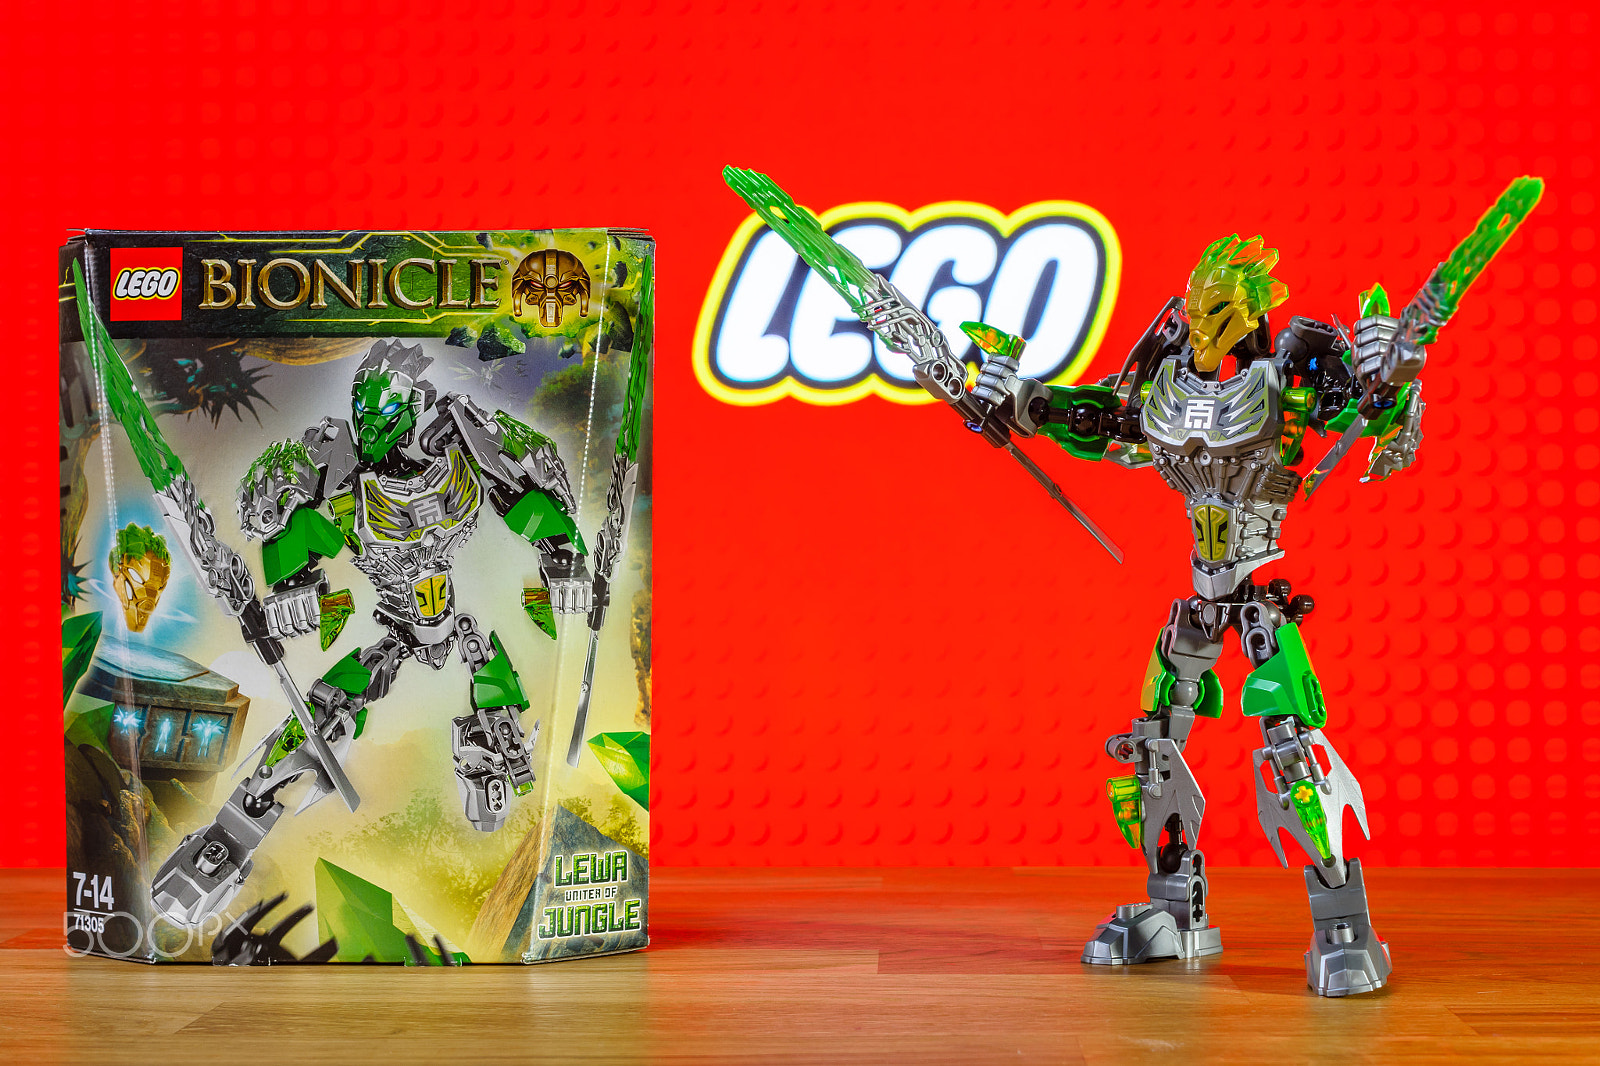 Sony SLT-A77 sample photo. A character (toy) universe of lego bionicle - lewa, uniter of jungle. photography